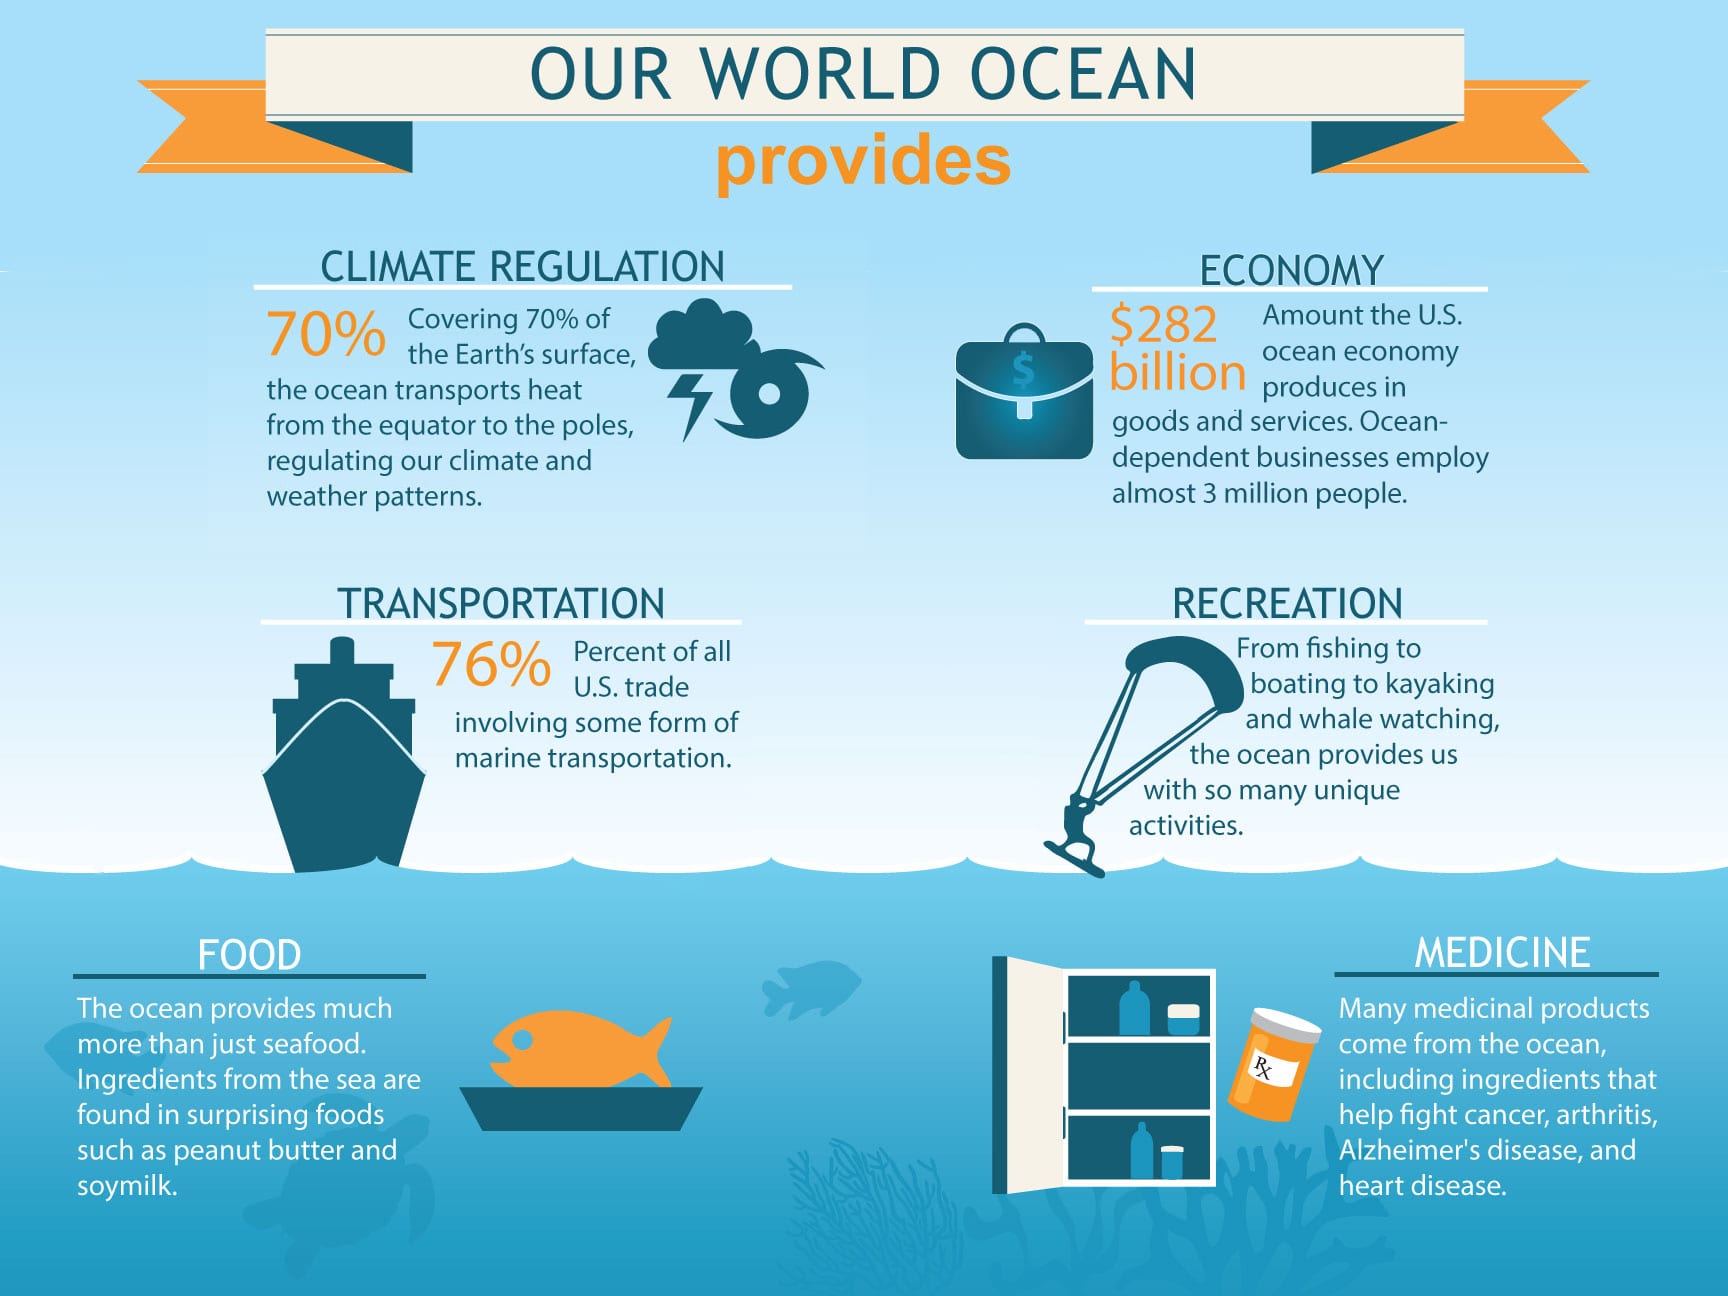 Why should we care about the ocean?